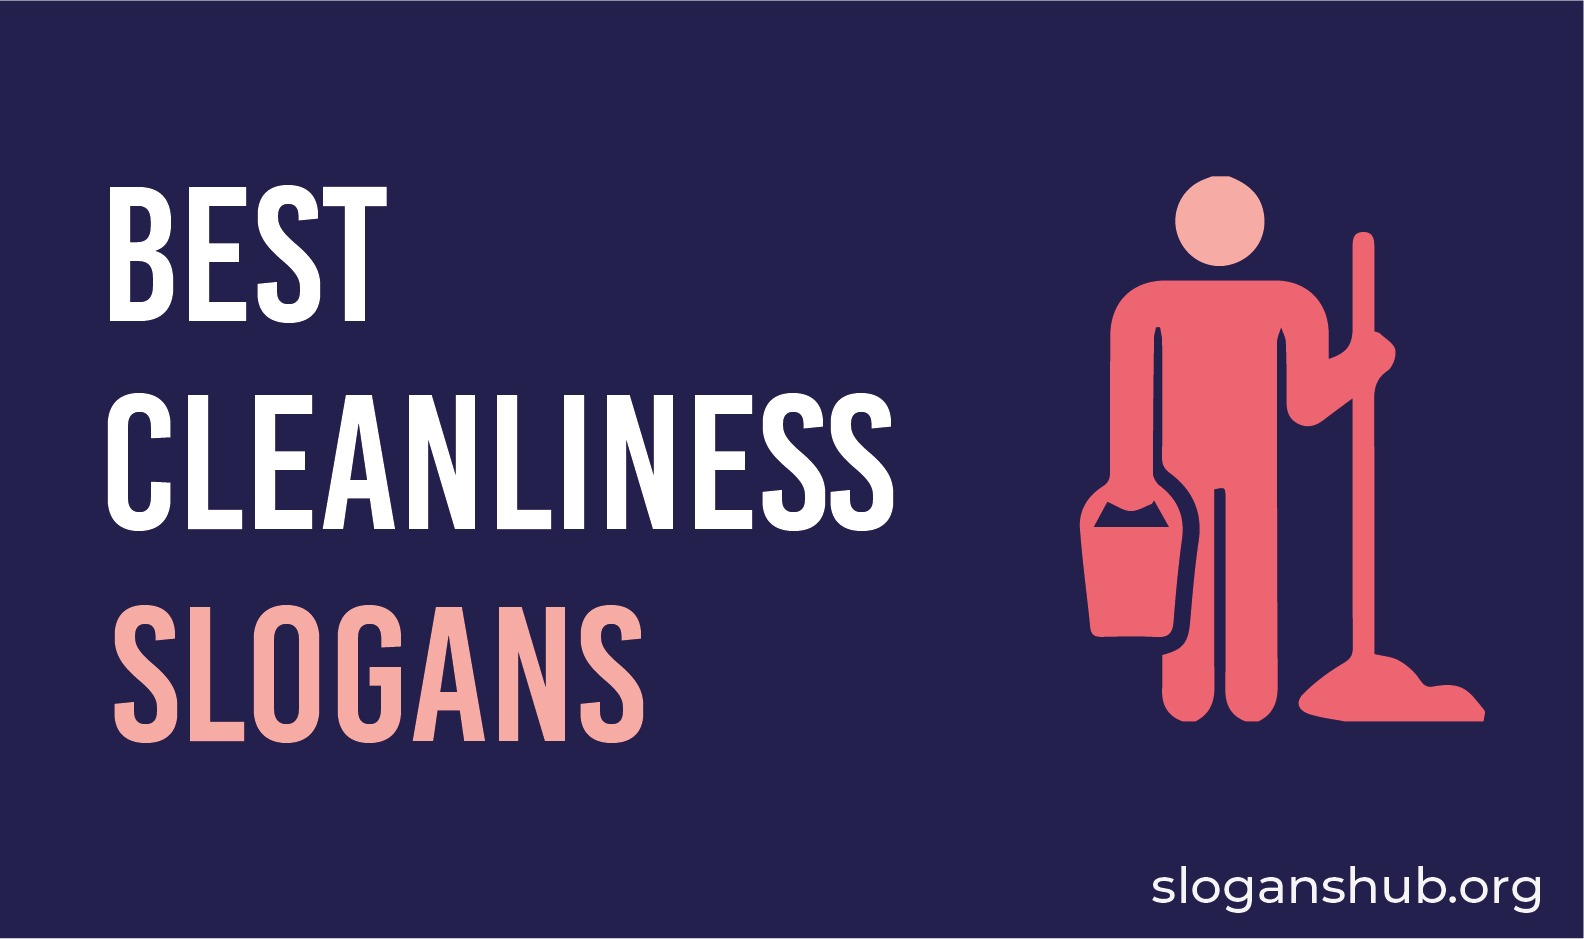 70 Best Cleanliness Slogans and Taglines You'll Love